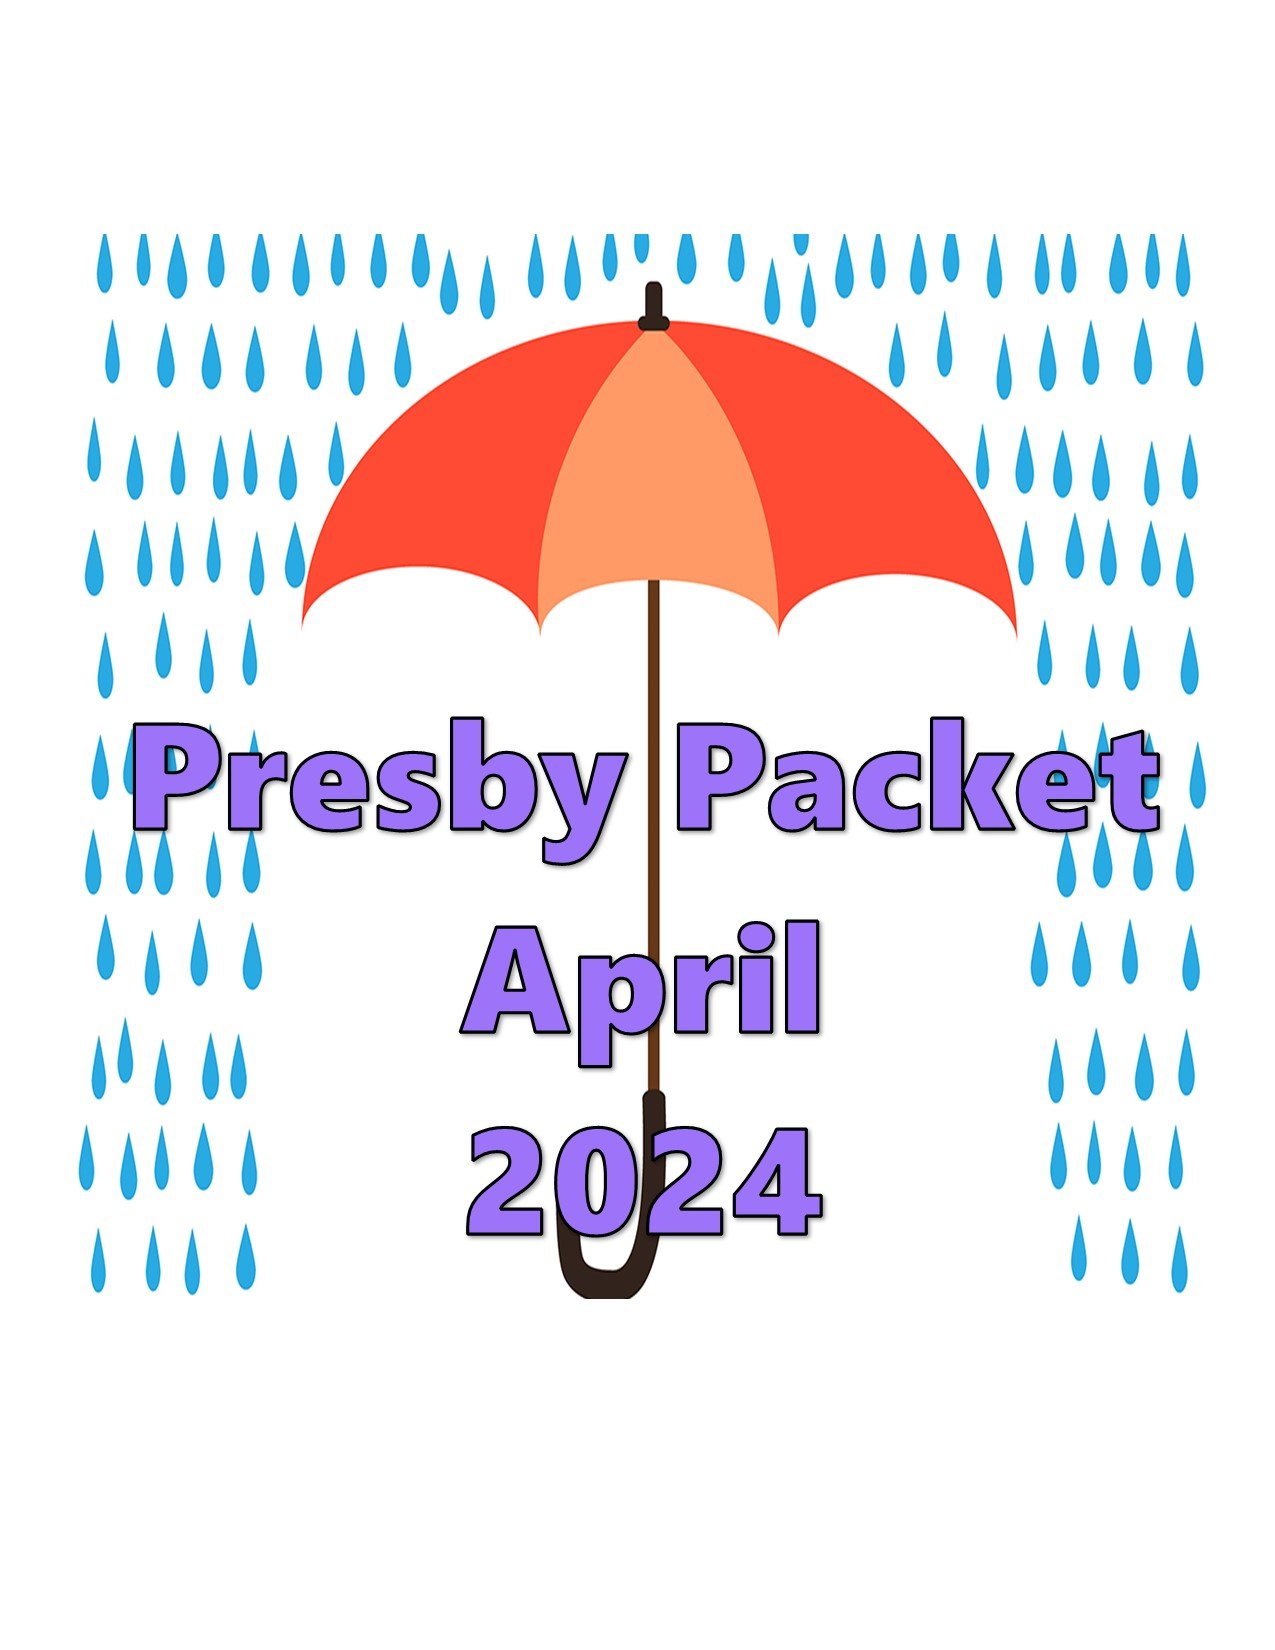 a Button -Presby Packet April 2024.jpg